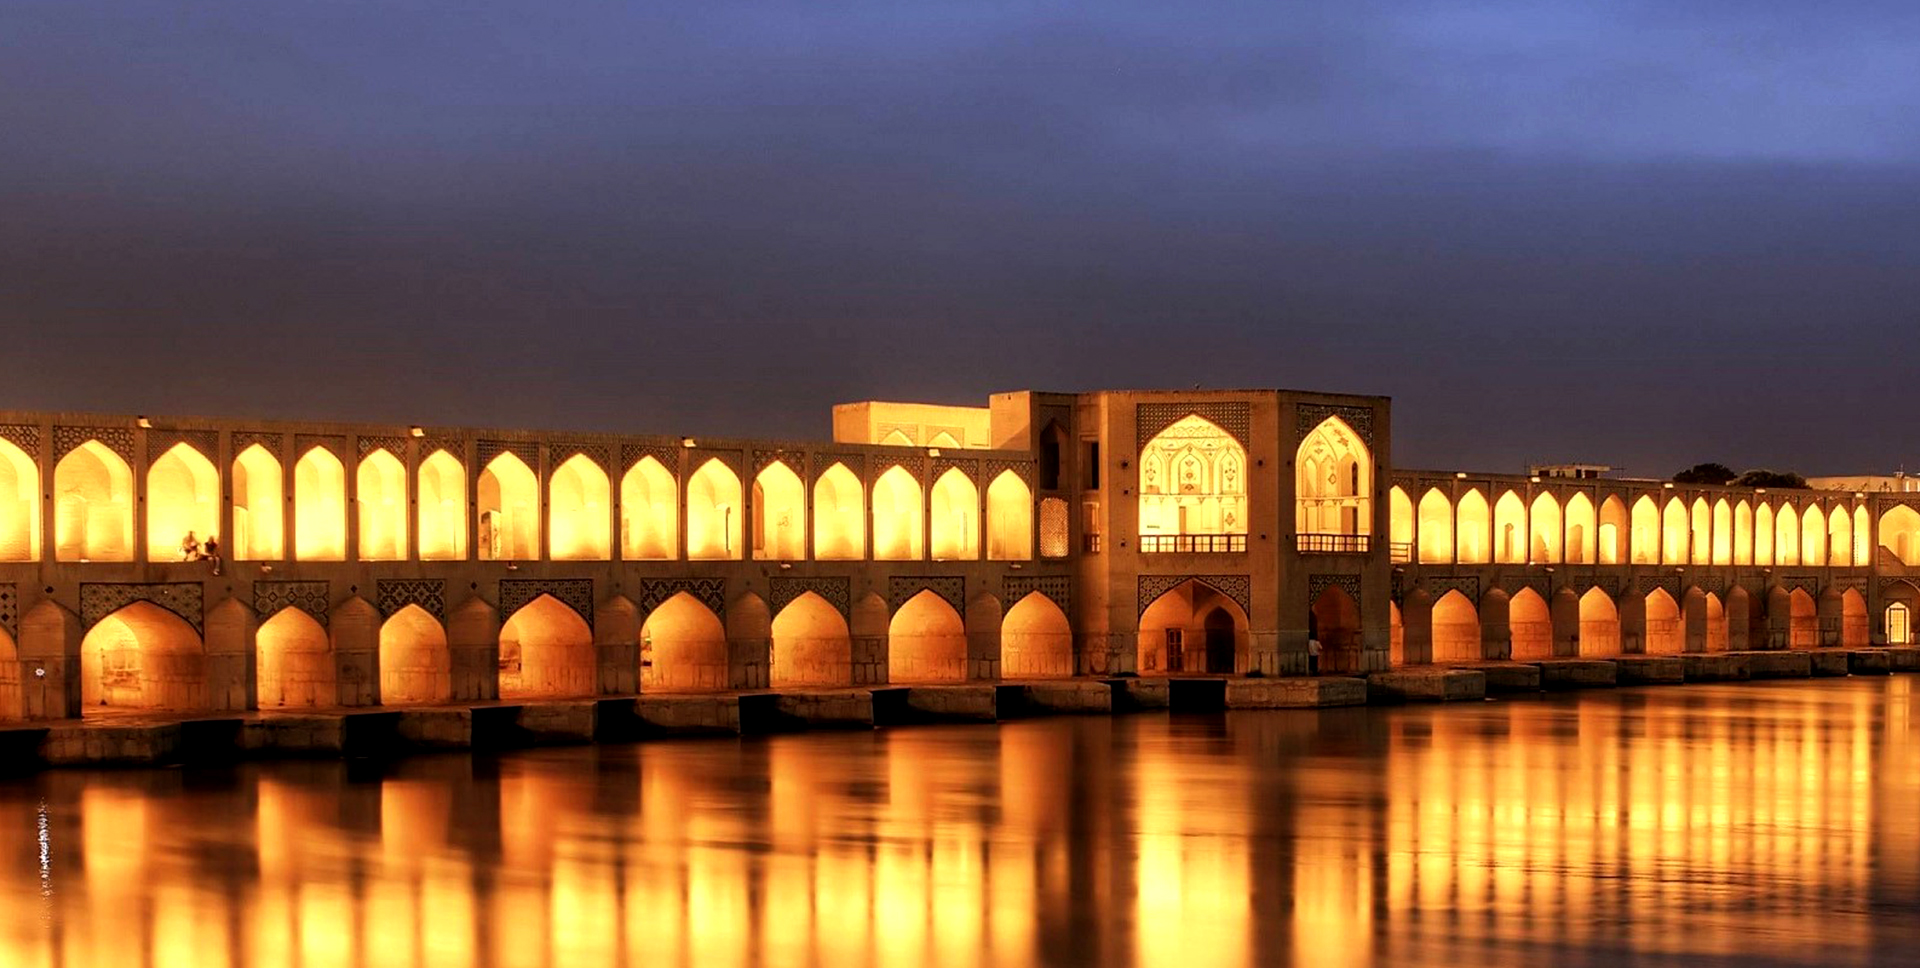 Do you know the sights of Iran?